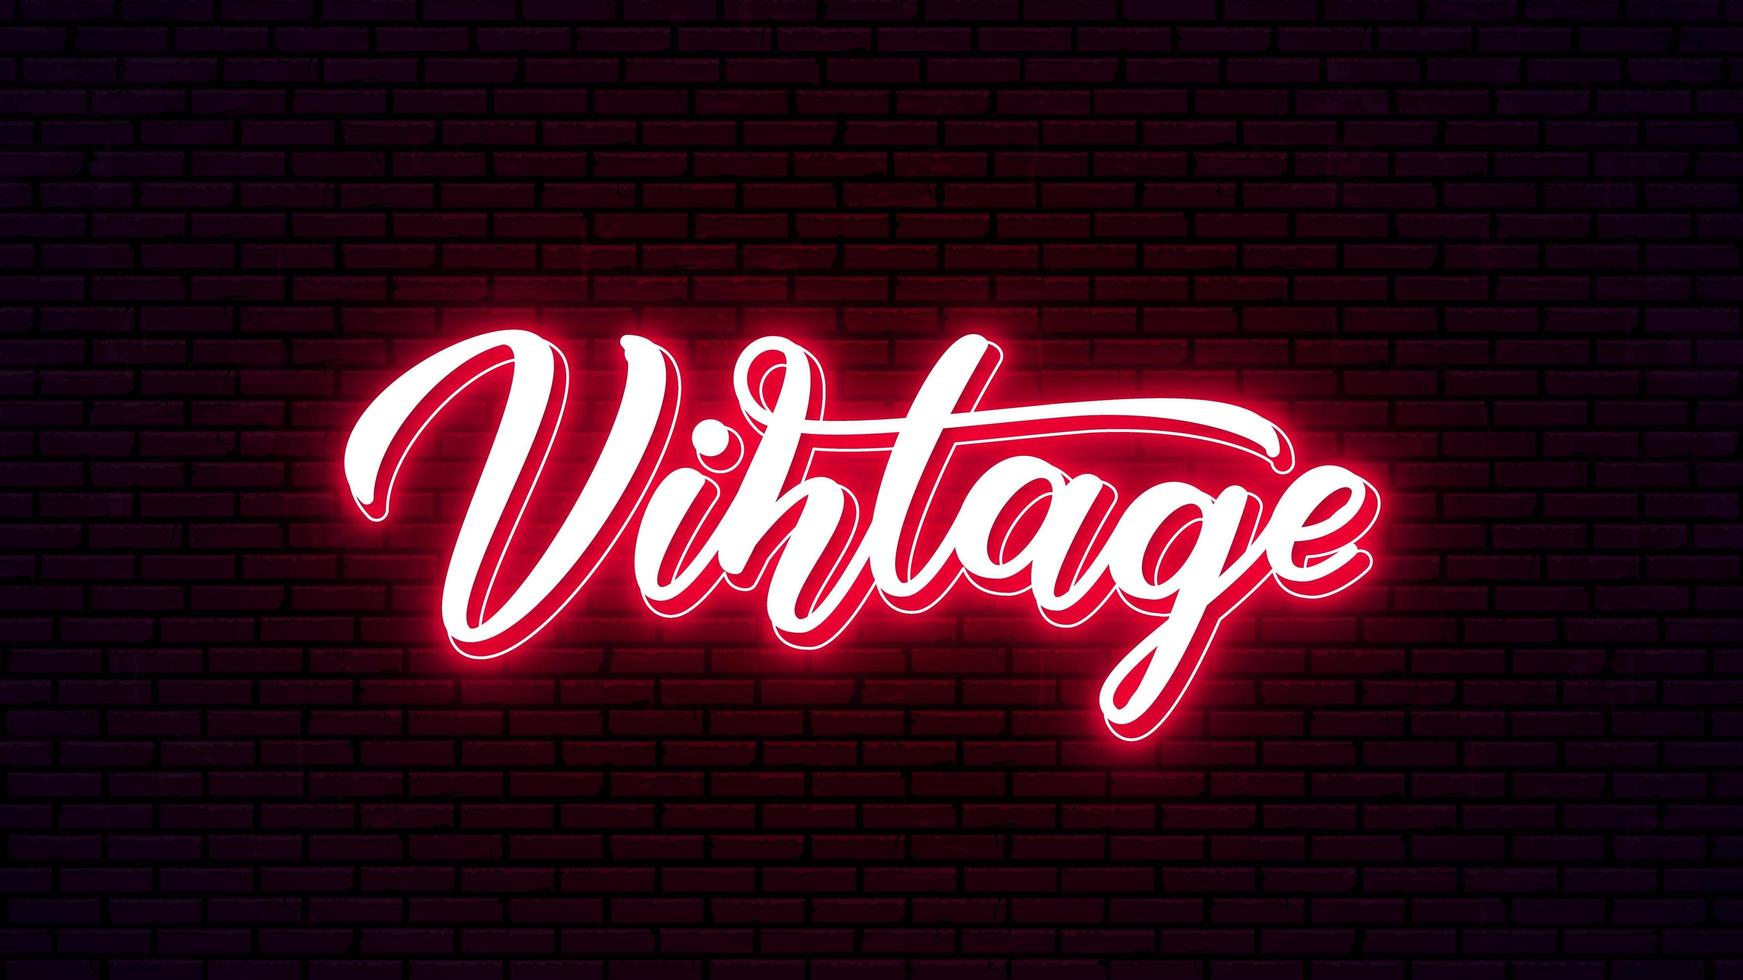 Vintage hand drawn neon lettering vector